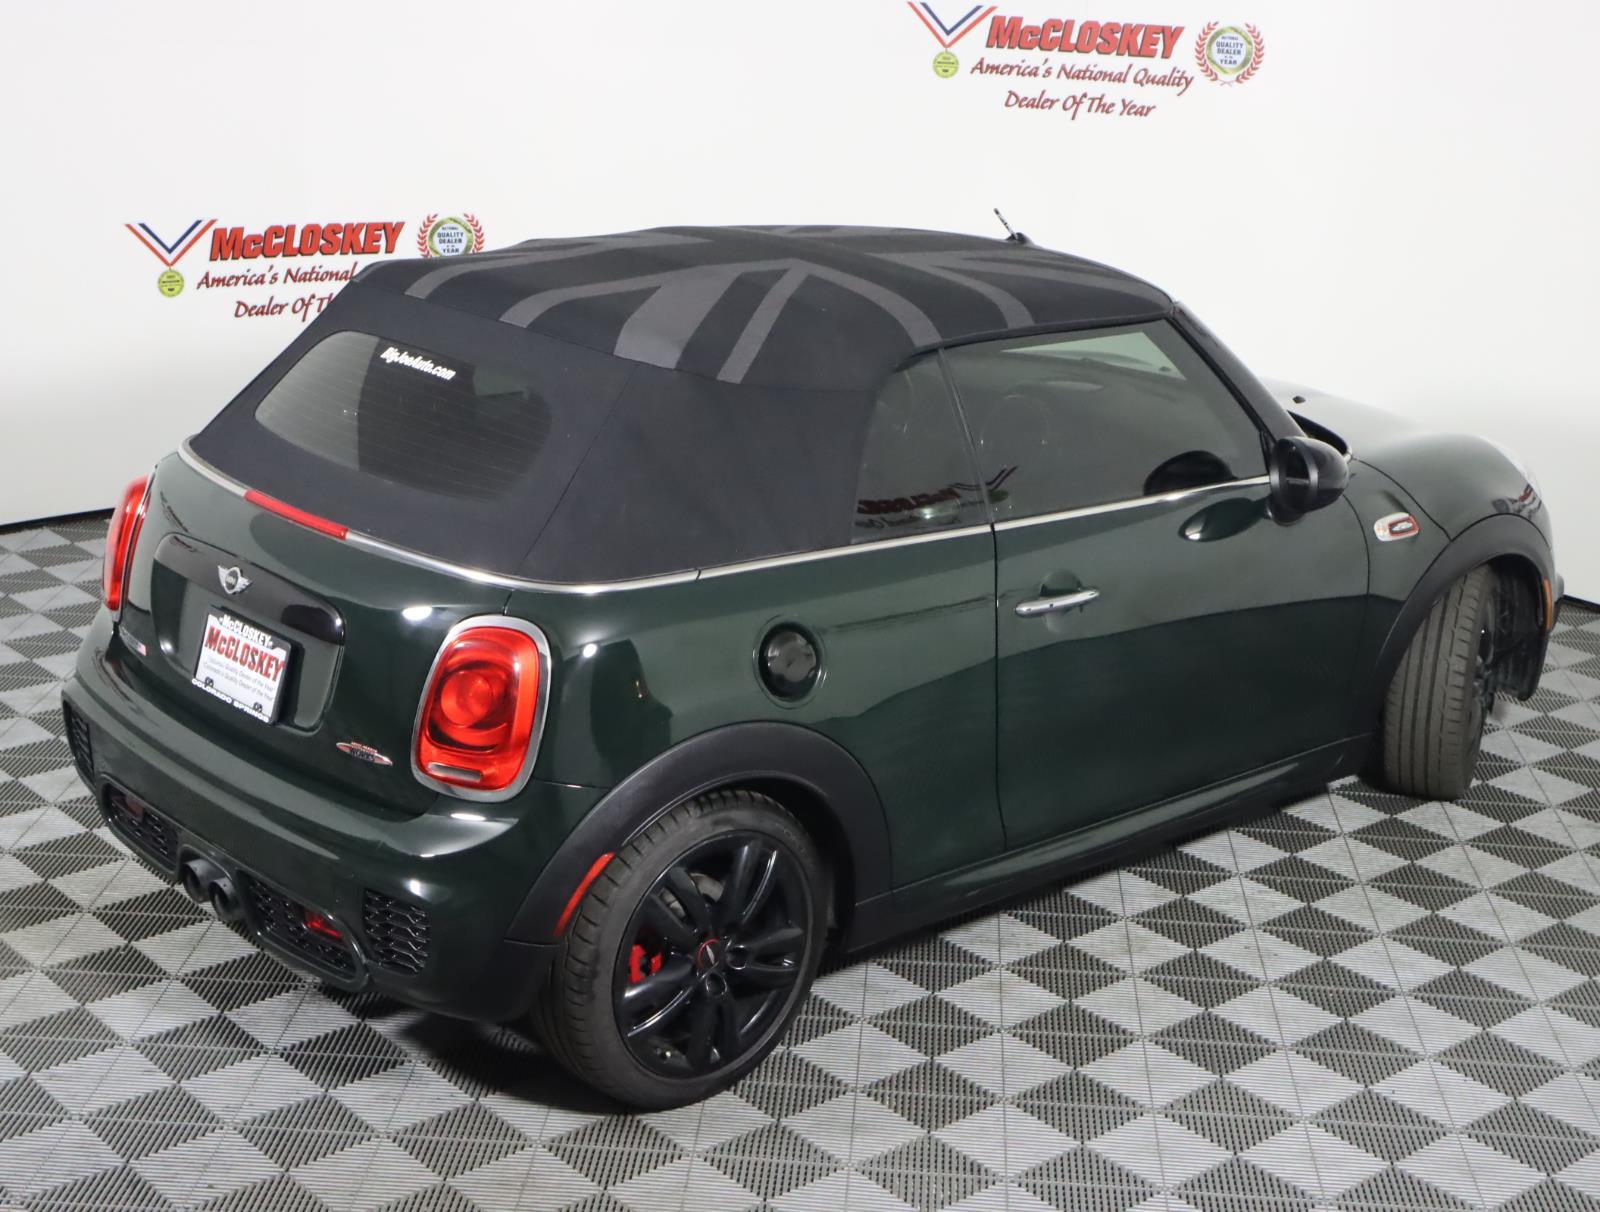 Preowned 2017 MINI Cooper Convertible John Cooper Works for sale by McCloskey Imports & 4X4's in Colorado Springs, CO